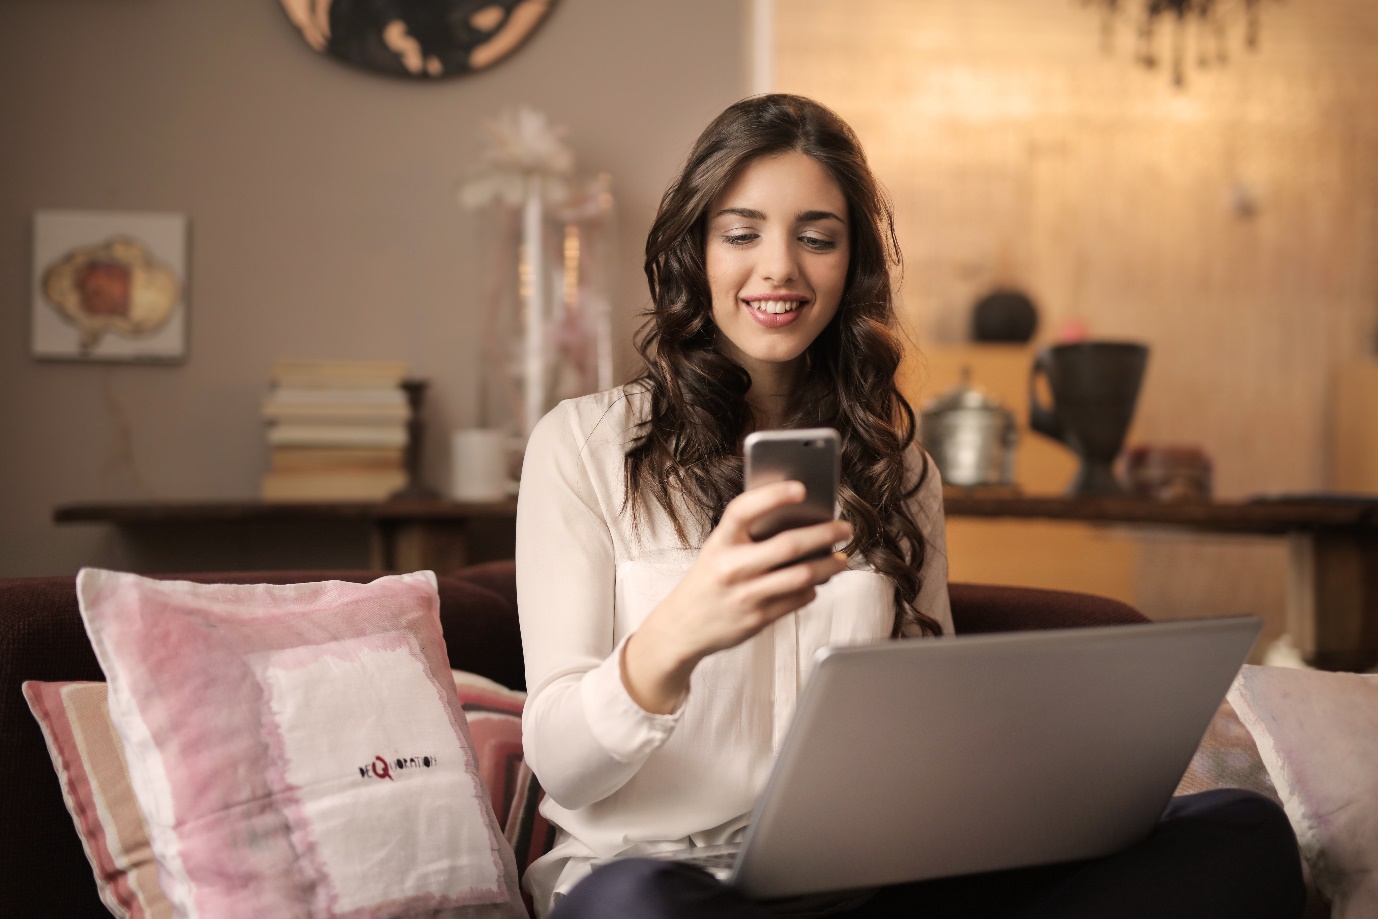 C:\Users\PROBOOK\AppData\Local\Microsoft\Windows\INetCache\Content.Word\woman-sitting-on-sofa-while-looking-at-phone-with-laptop-on-920382.jpg